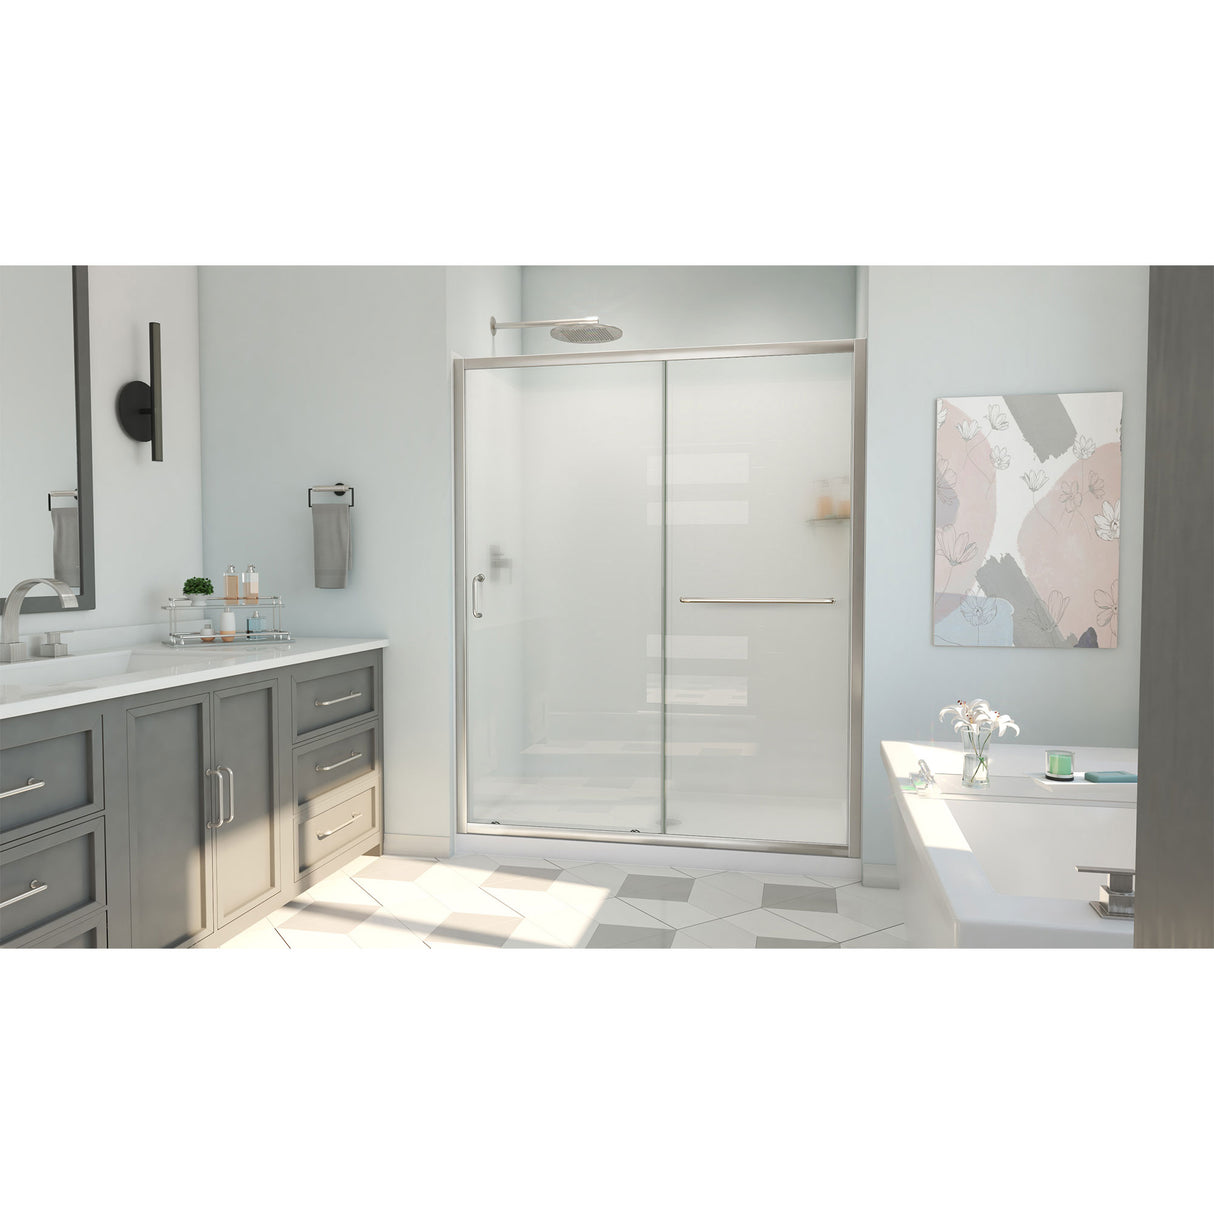 DreamLine Infinity-Z 32 in. D x 60 in. W x 78 3/4 in. H Sliding Shower Door, Base, and White Wall Kit in Brushed Nickel and Frosted Glass